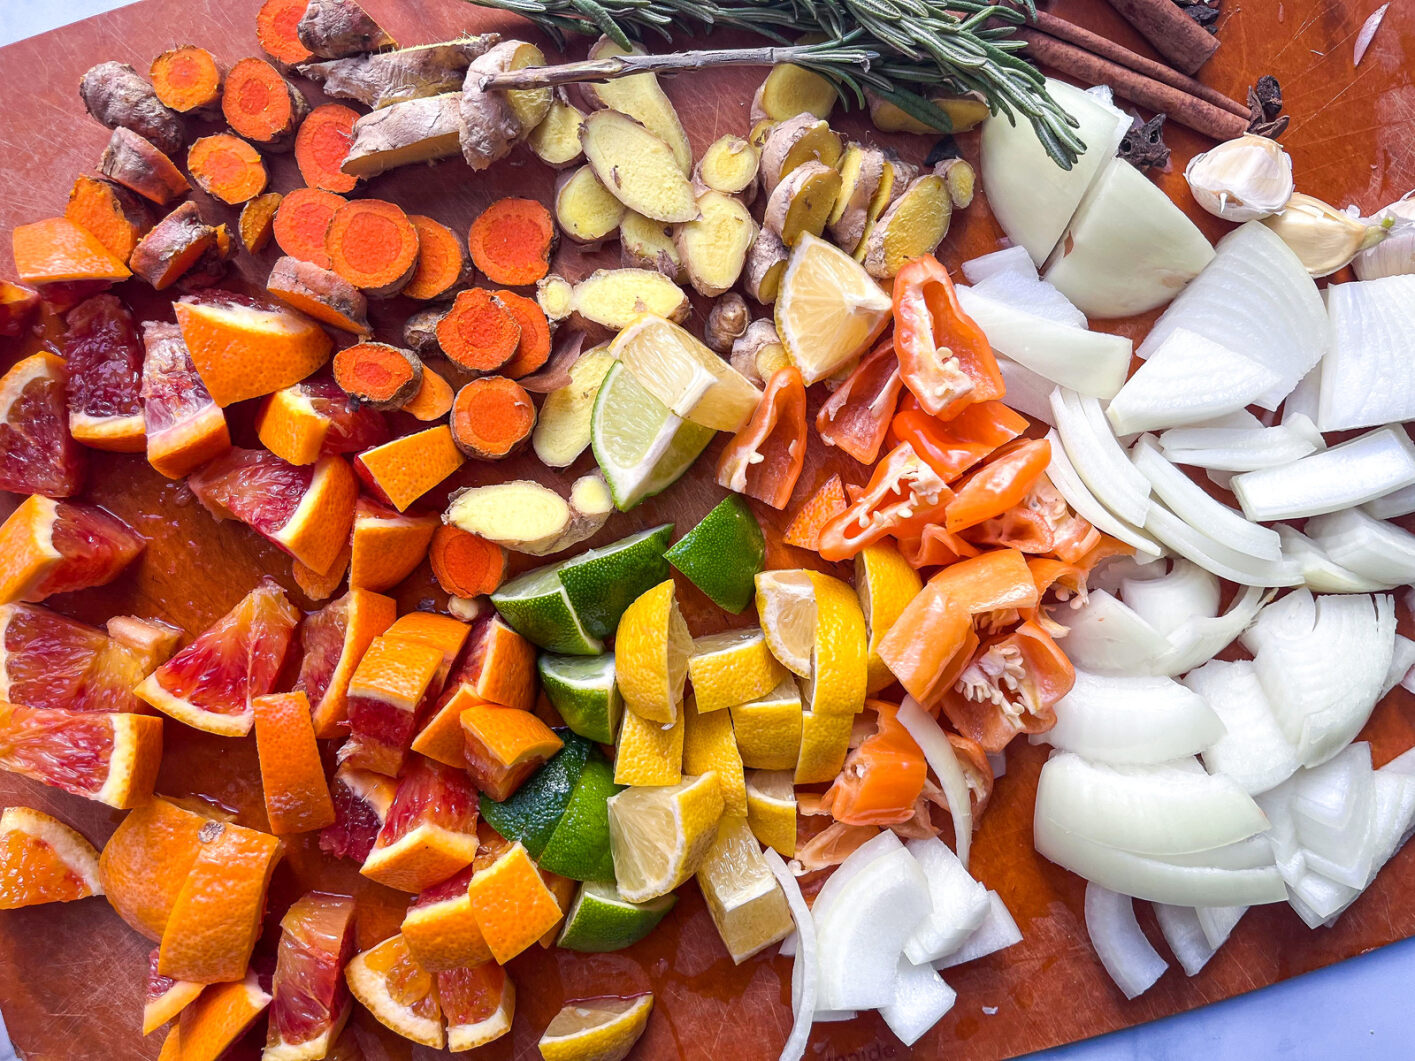 fire cider ingredients chopped up on a cutting board